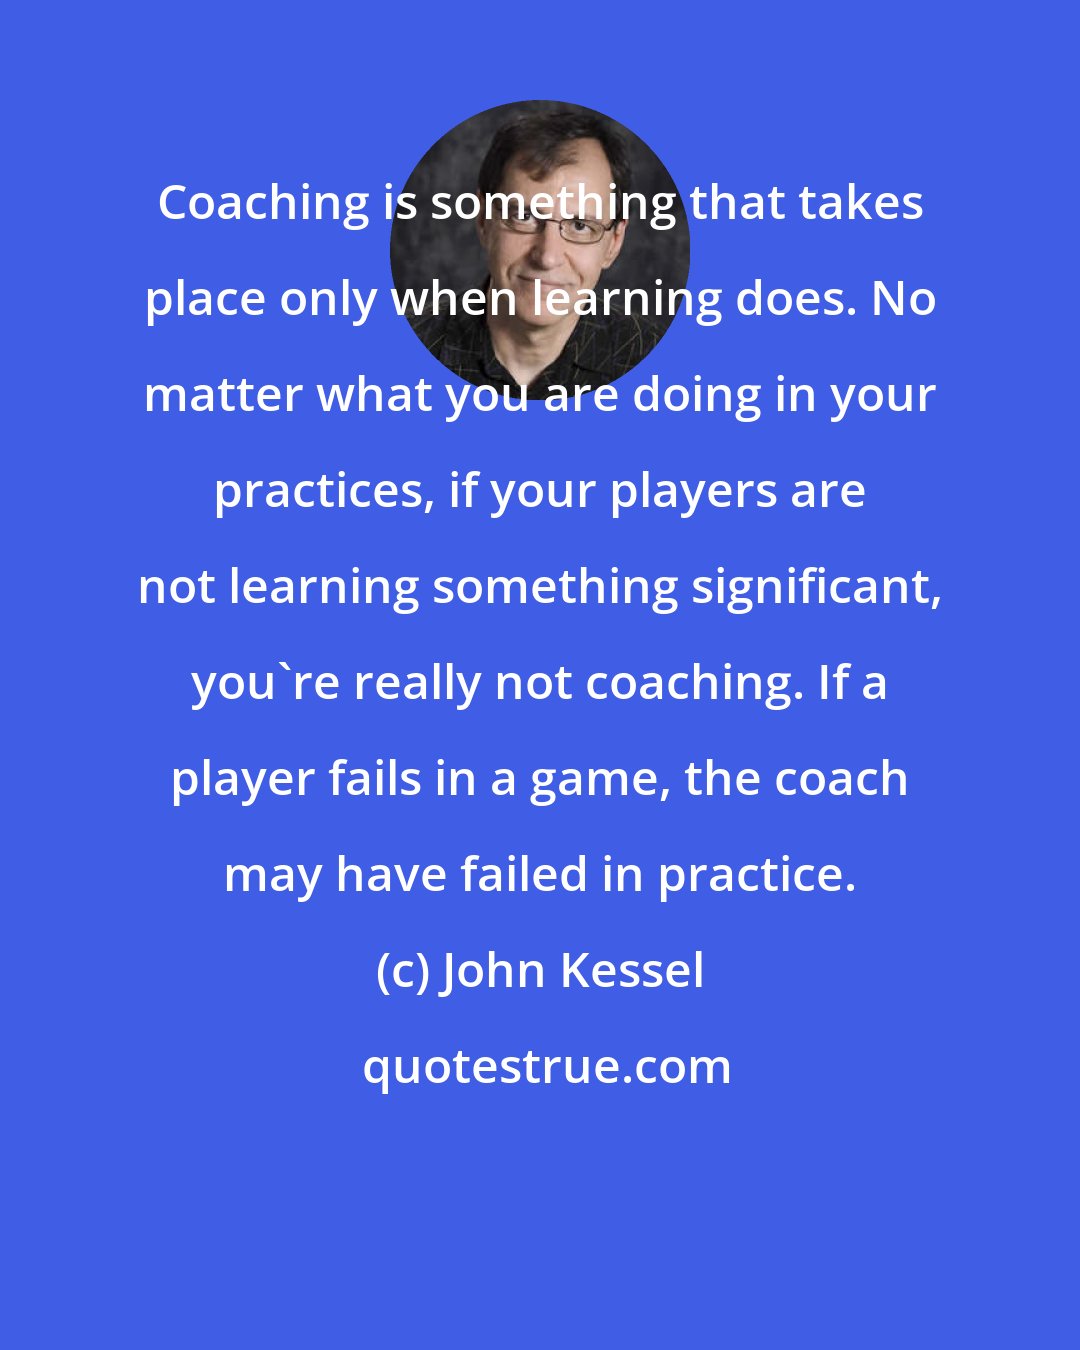 John Kessel: Coaching is something that takes place only when learning does. No matter what you are doing in your practices, if your players are not learning something significant, you're really not coaching. If a player fails in a game, the coach may have failed in practice.